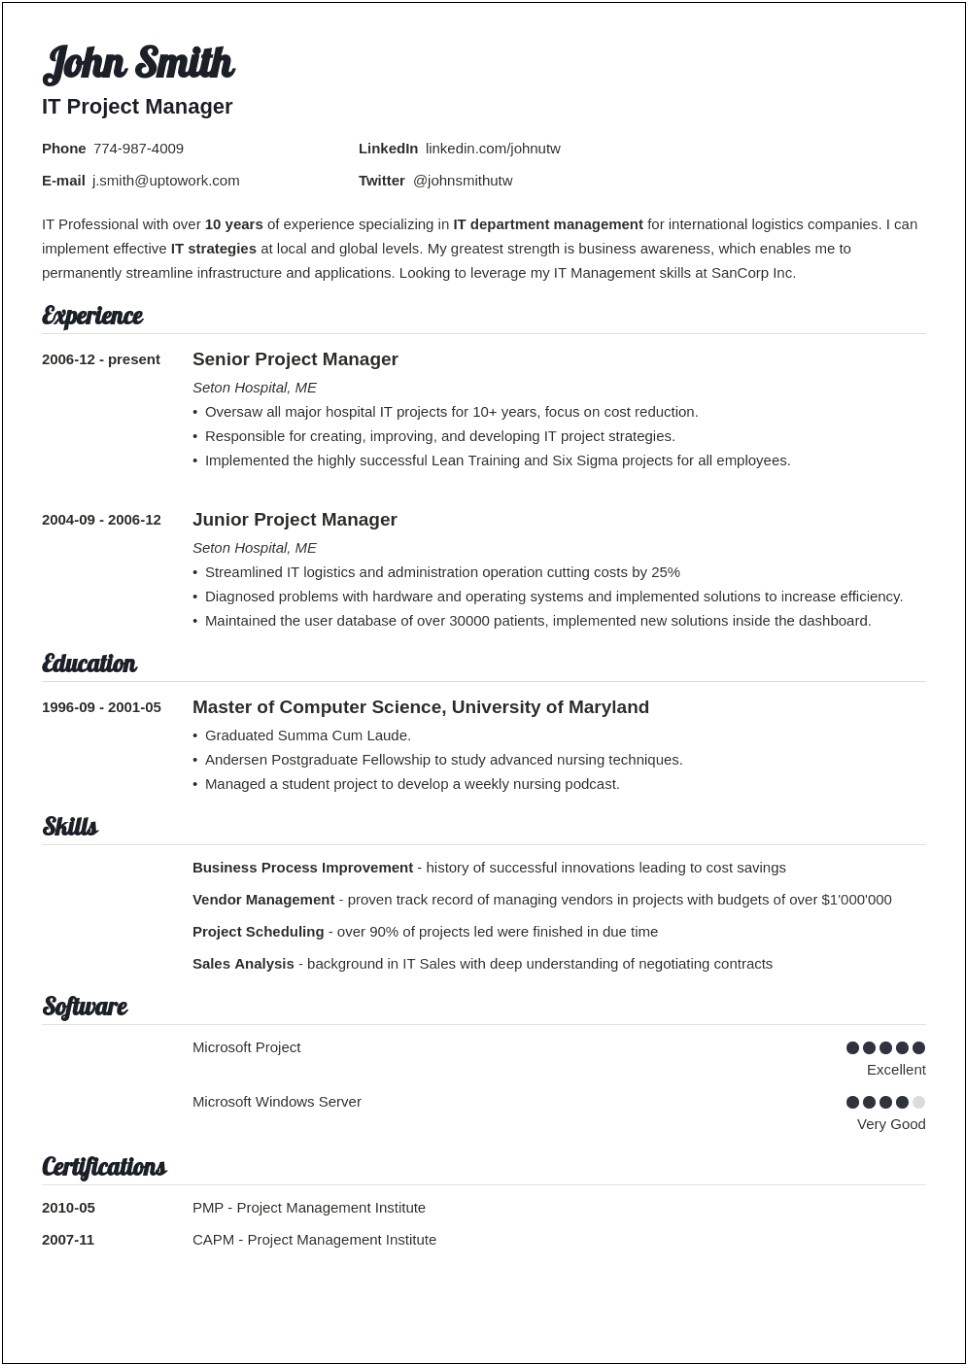 Resume Format To Get A Job